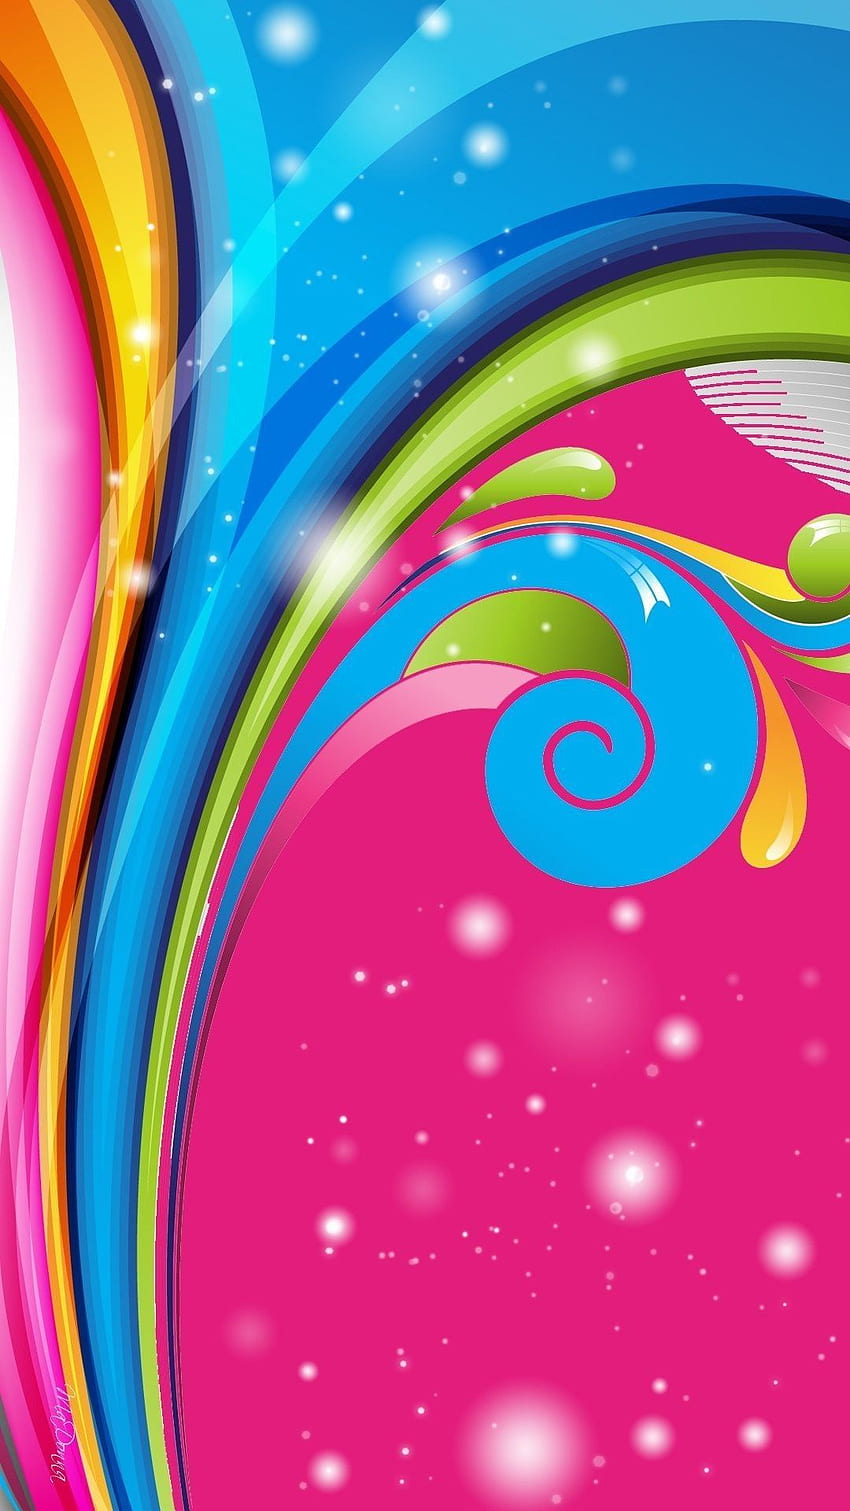 Colorful standard 4:3 wallpapers hd, desktop backgrounds 1024x768, images  and pictures